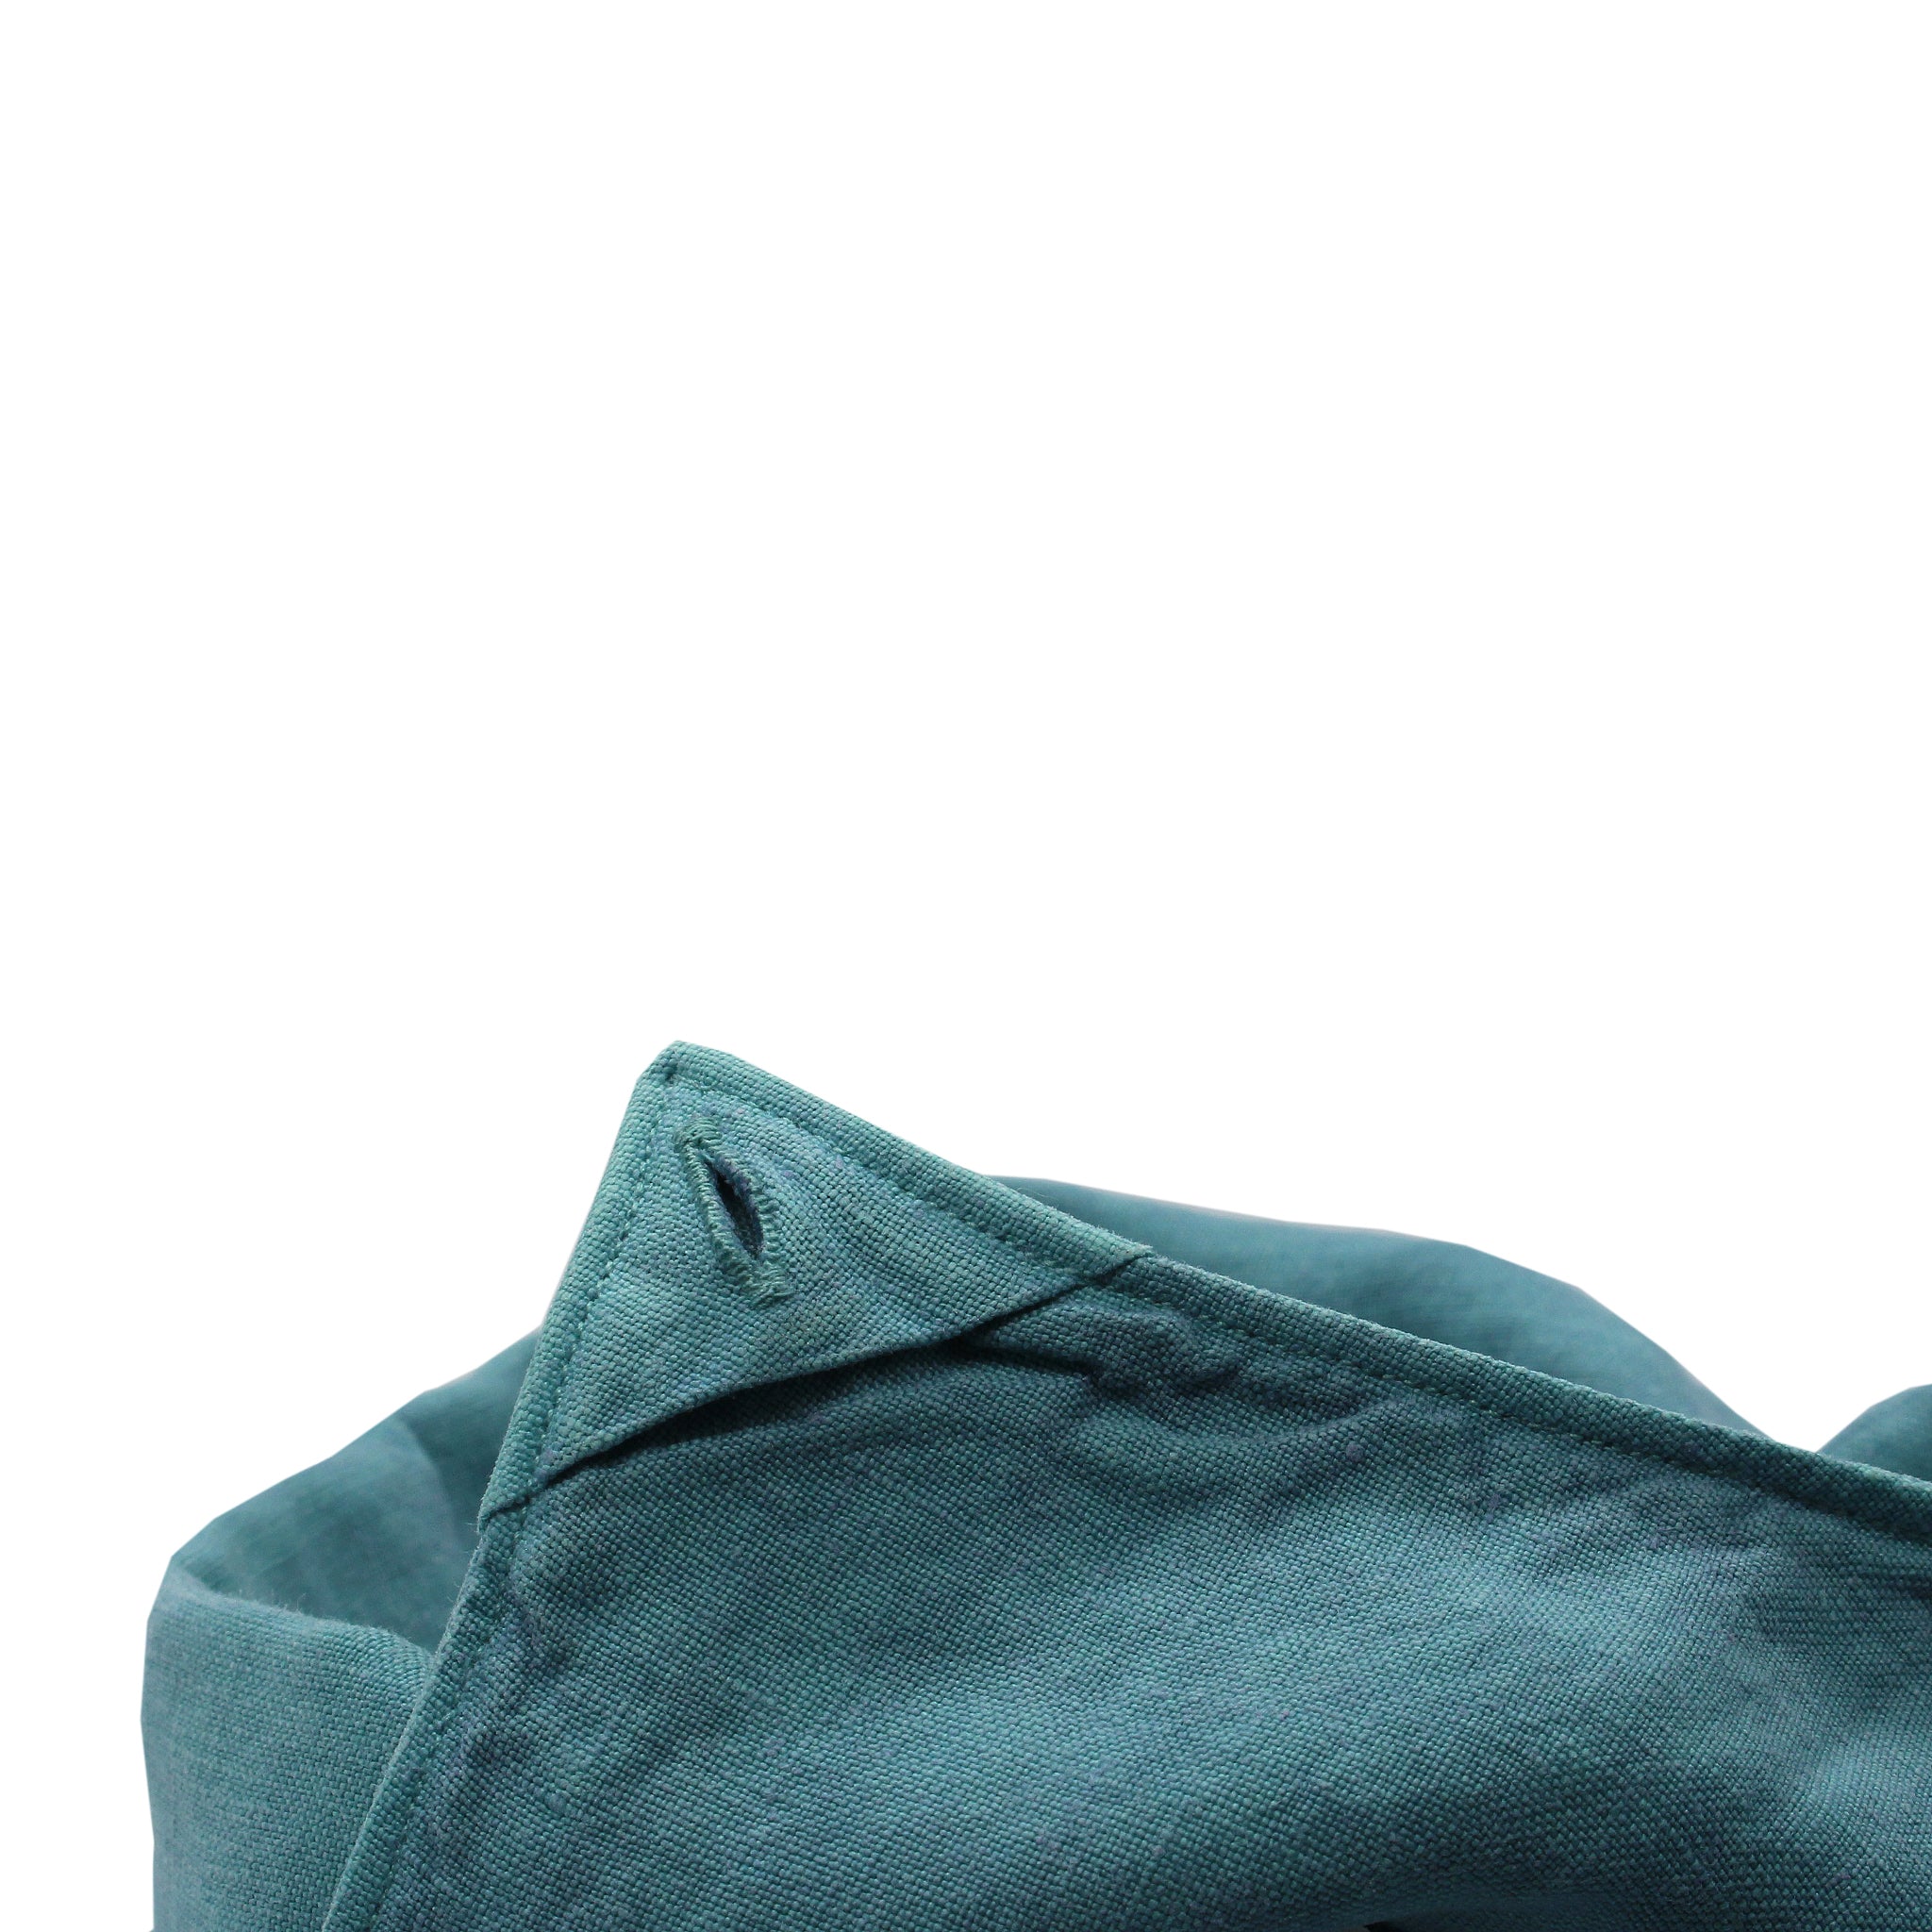 Tokyo slim fit shirt in turquoise linen one pieces collar